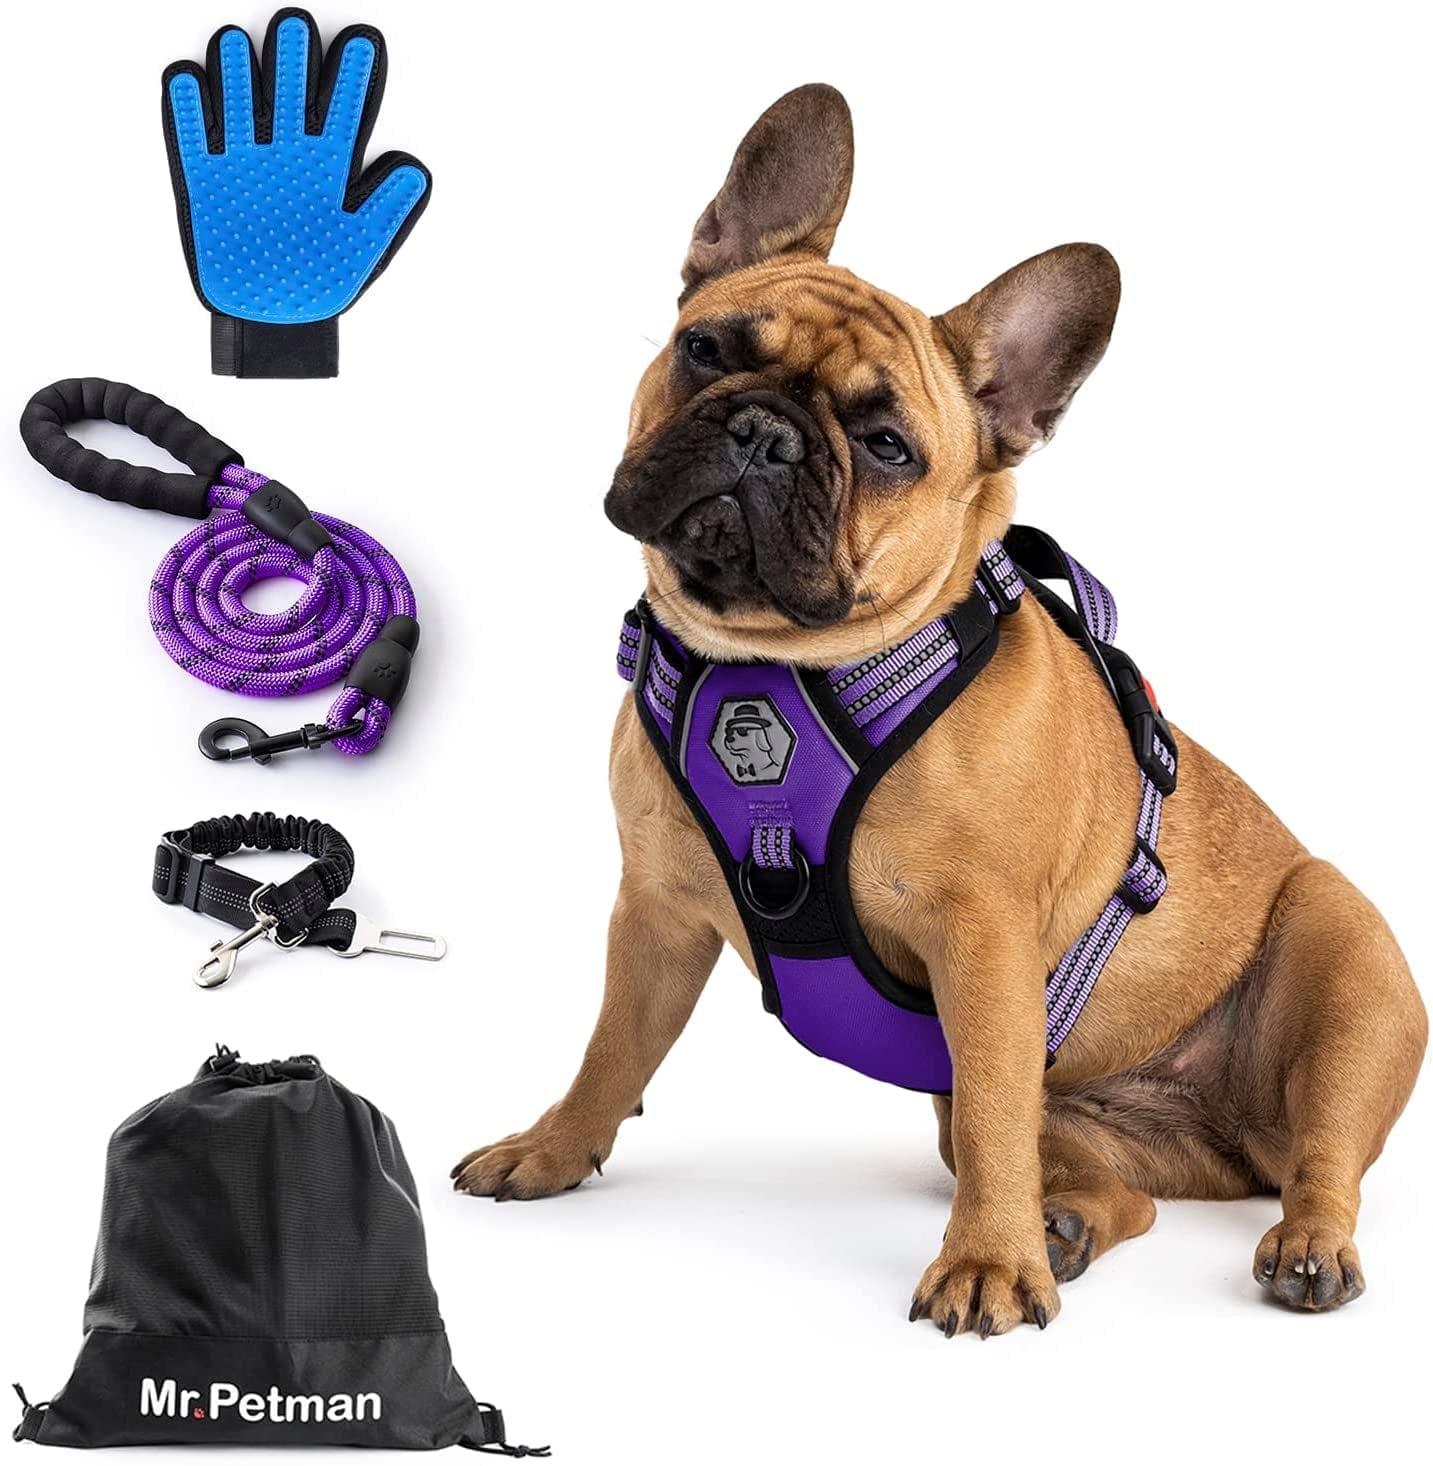 MR. PETMAN No Pull Dog Harness with Leash, Seat Belt, Grooming Glove - No Choke Dog Harness Set for Small Medium Large Dogs- Reflective Adjustable Dog Vest Harnesses with Handle for Walking Training Animals & Pet Supplies > Pet Supplies > Dog Supplies > Dog Apparel Mr. Petman Modern Purple Medium 